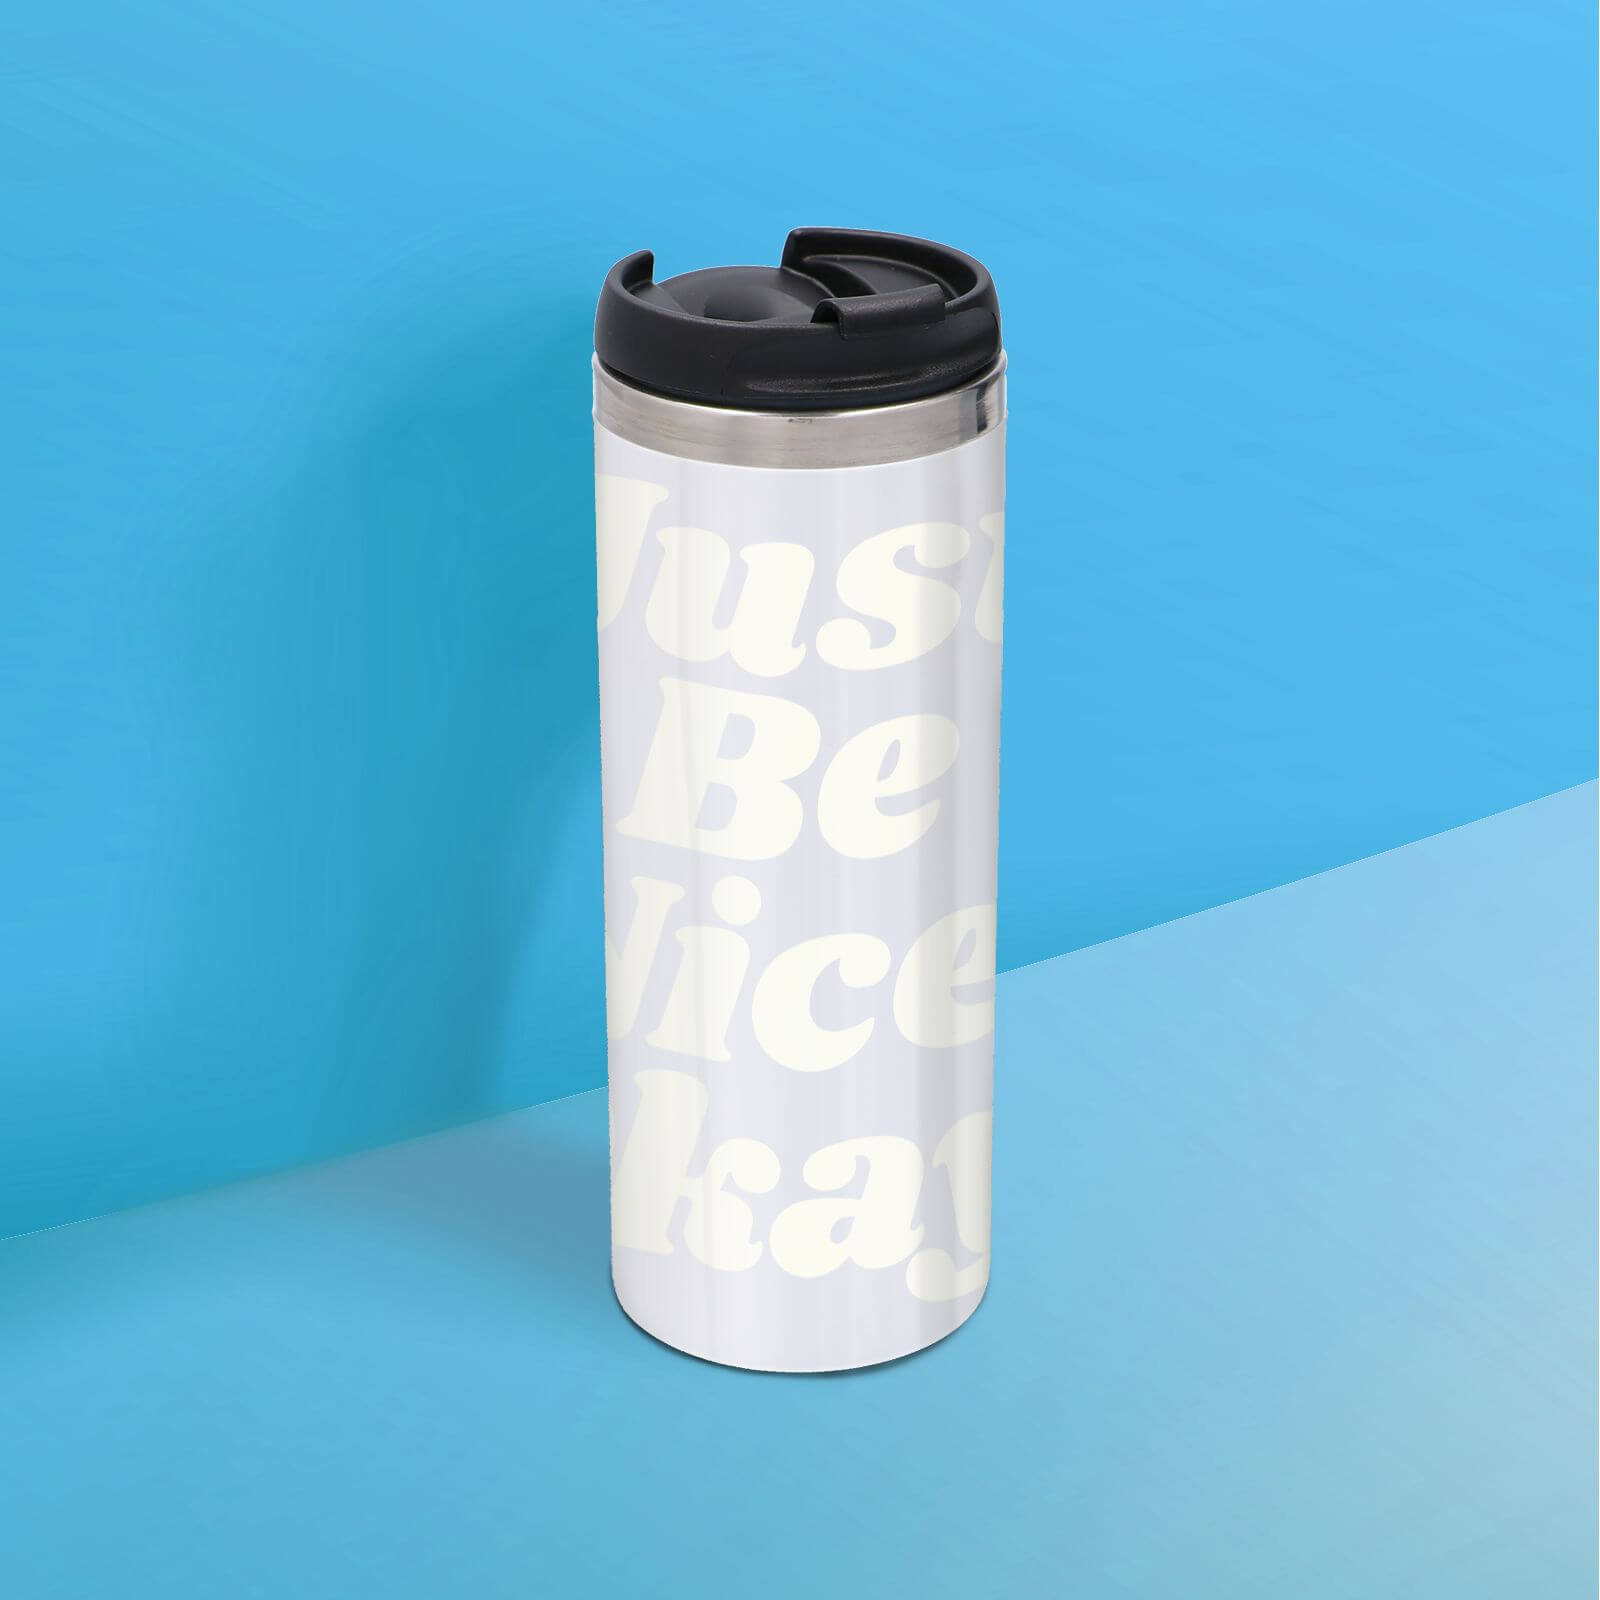 The Motivated Type Just Be Nice, Okay! Thermo Travel Mug